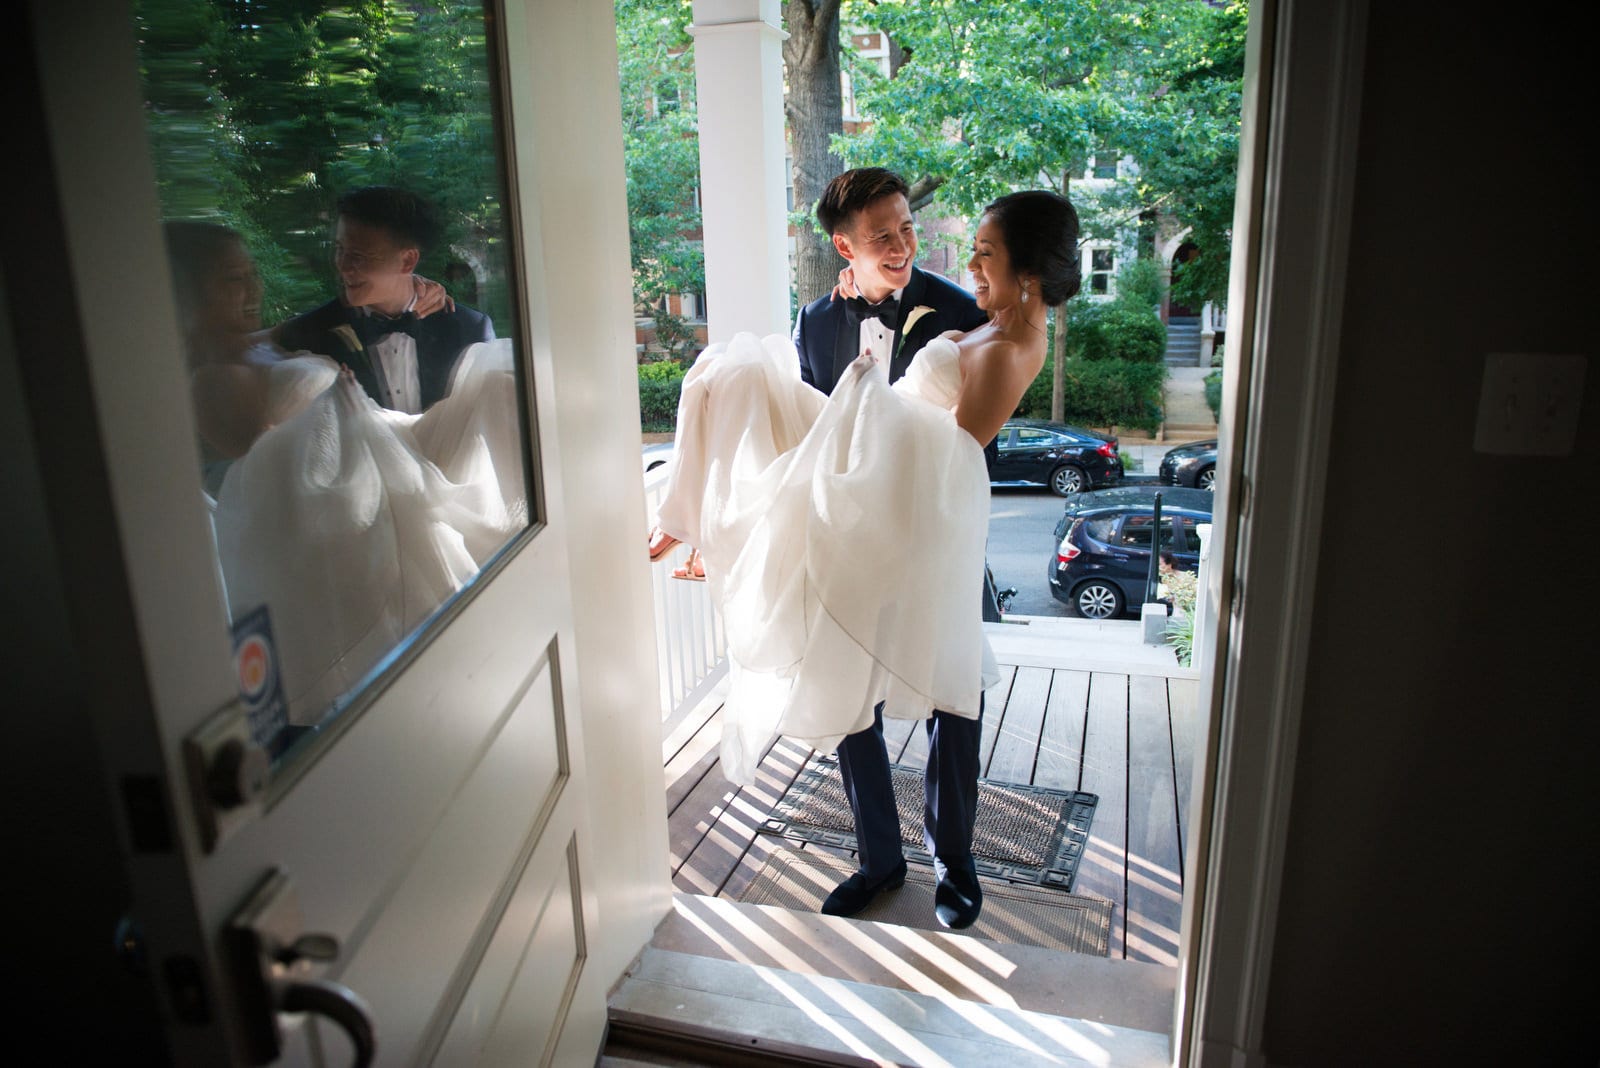 A groom carries his bride across the threshold of their home in the Kalorama neighborhood of Washington, DC.